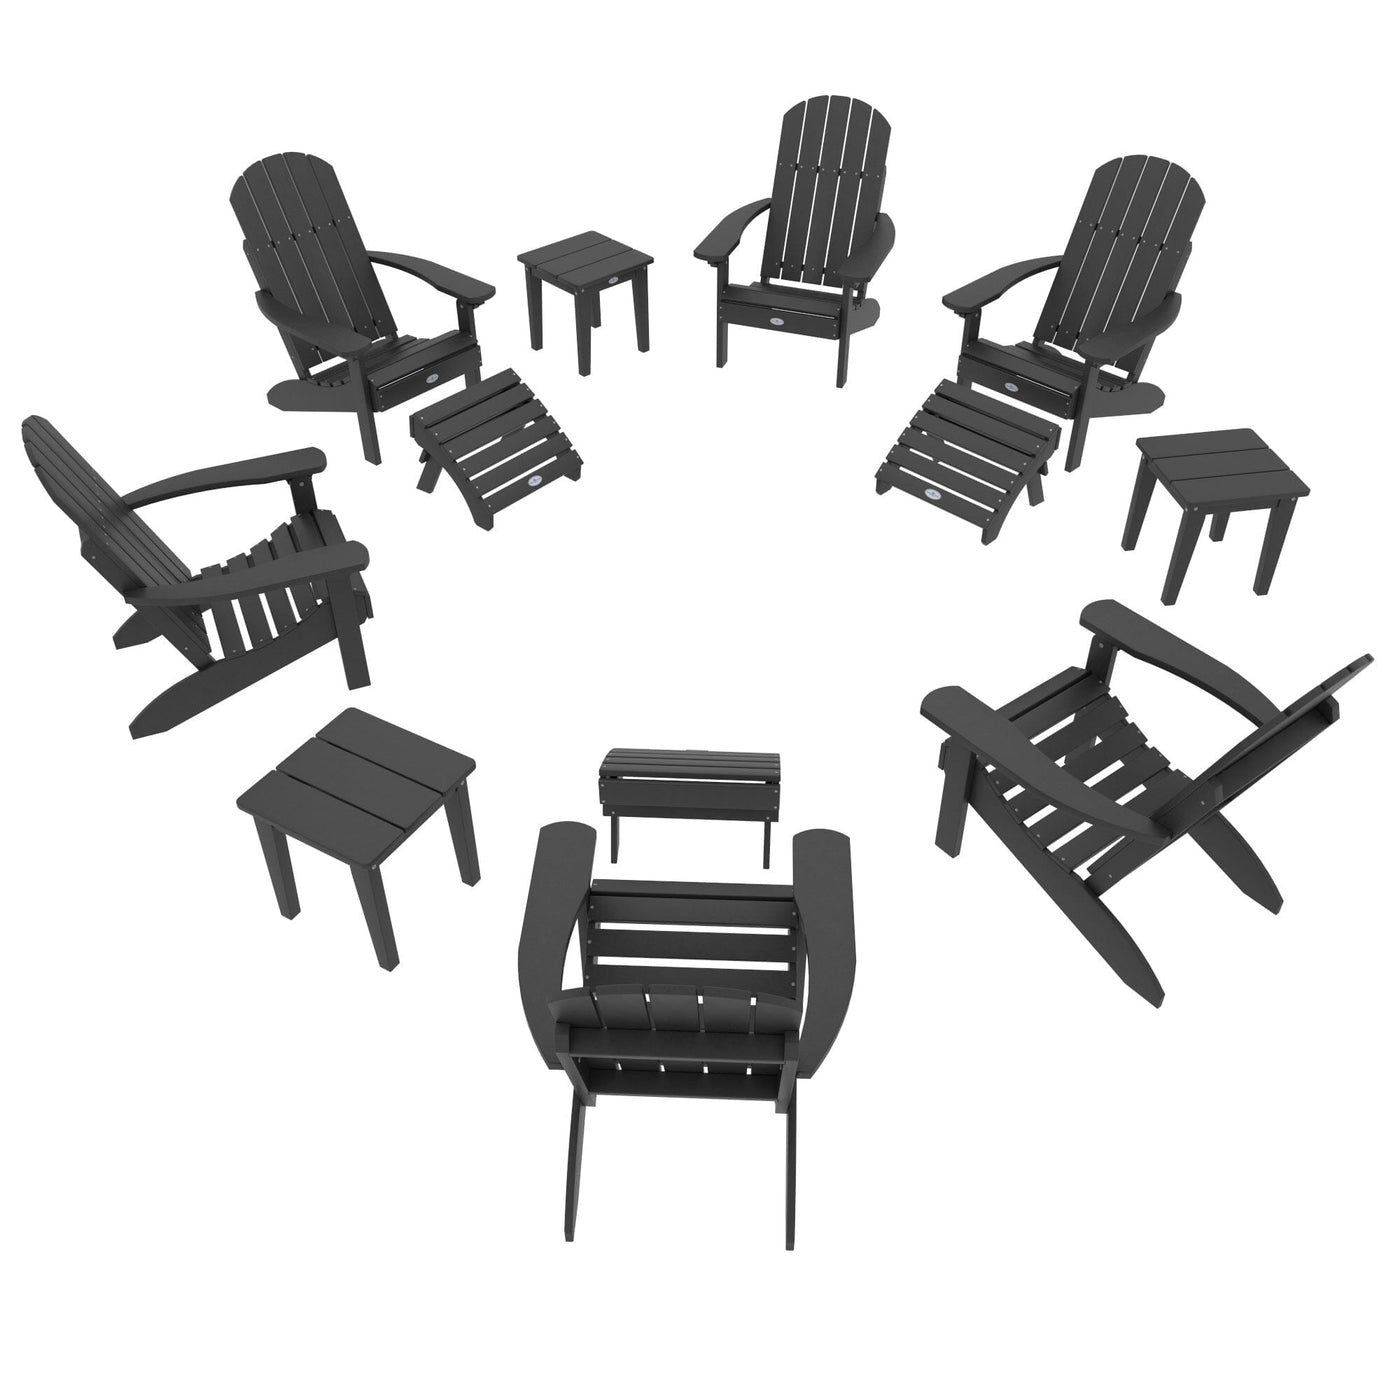 Cape Classic Adirondack, Side Table and Ottoman 12 pc Set Kitted Set Bahia Verde Outdoors Black Sand 